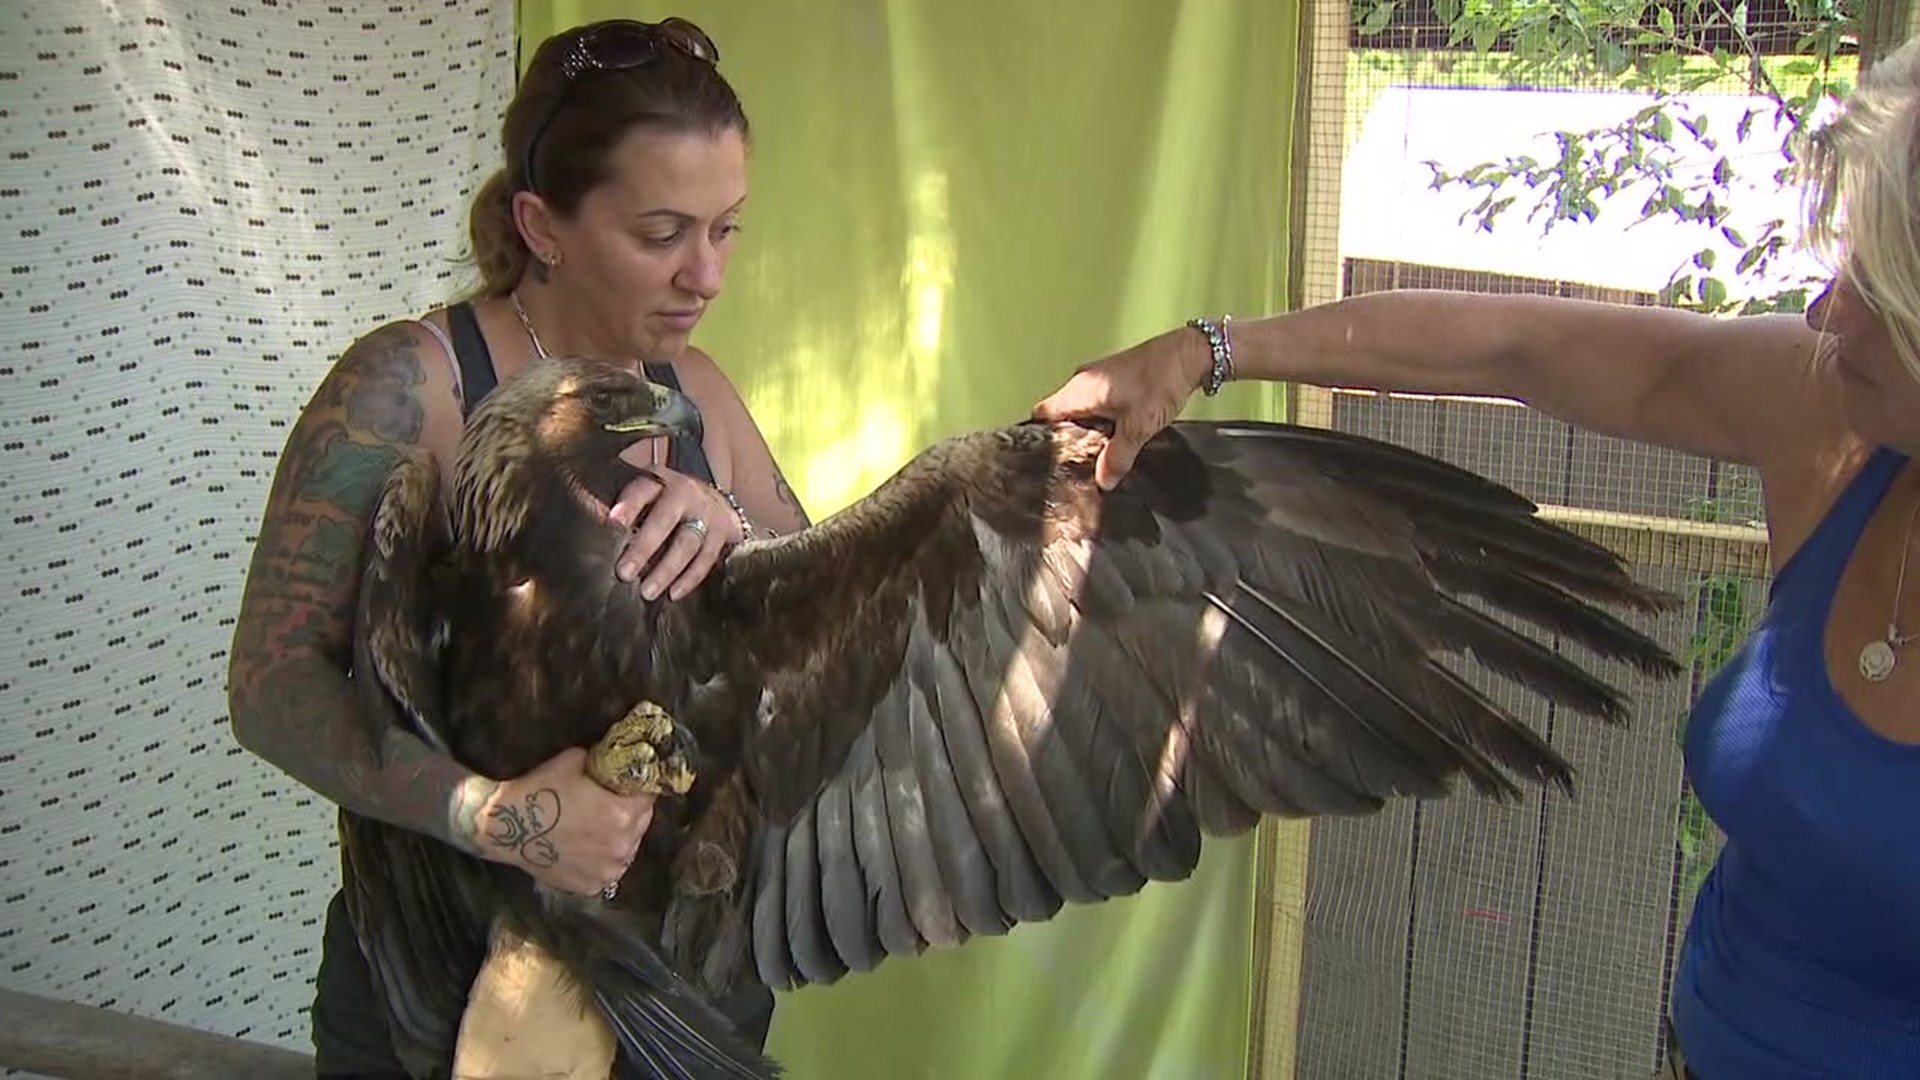 The U.S. Fish and Wildlife Service says it is against regulations to release an eagle with only one foot.